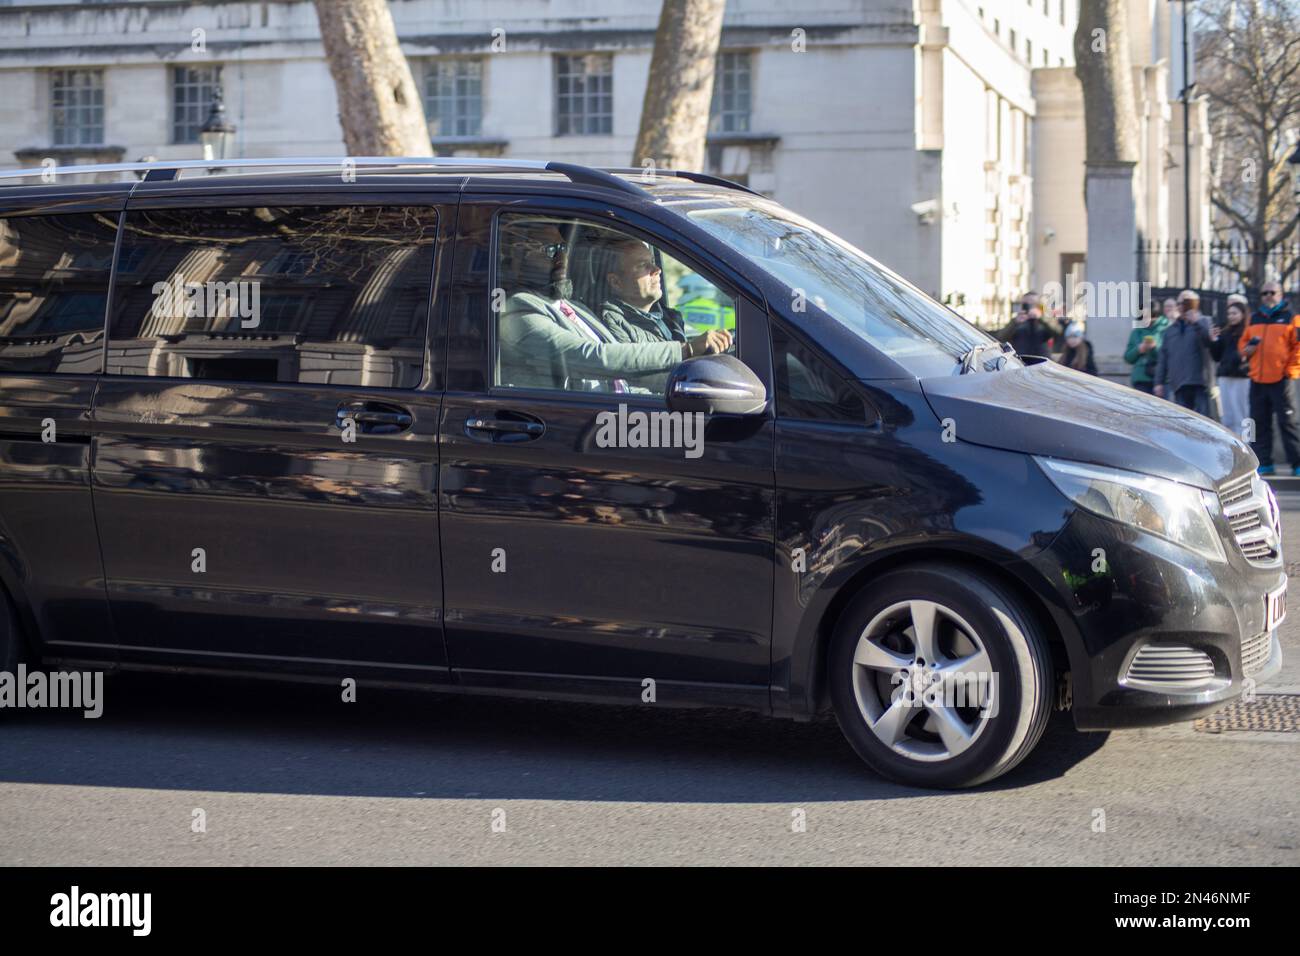 London, UK - Feb 8, 2023: Cars carrying President Volodymyr Zelensky as he makes his first visit to the UK since Russian invasion. Credit: Sinai Noor/Alamy Live News Stock Photo